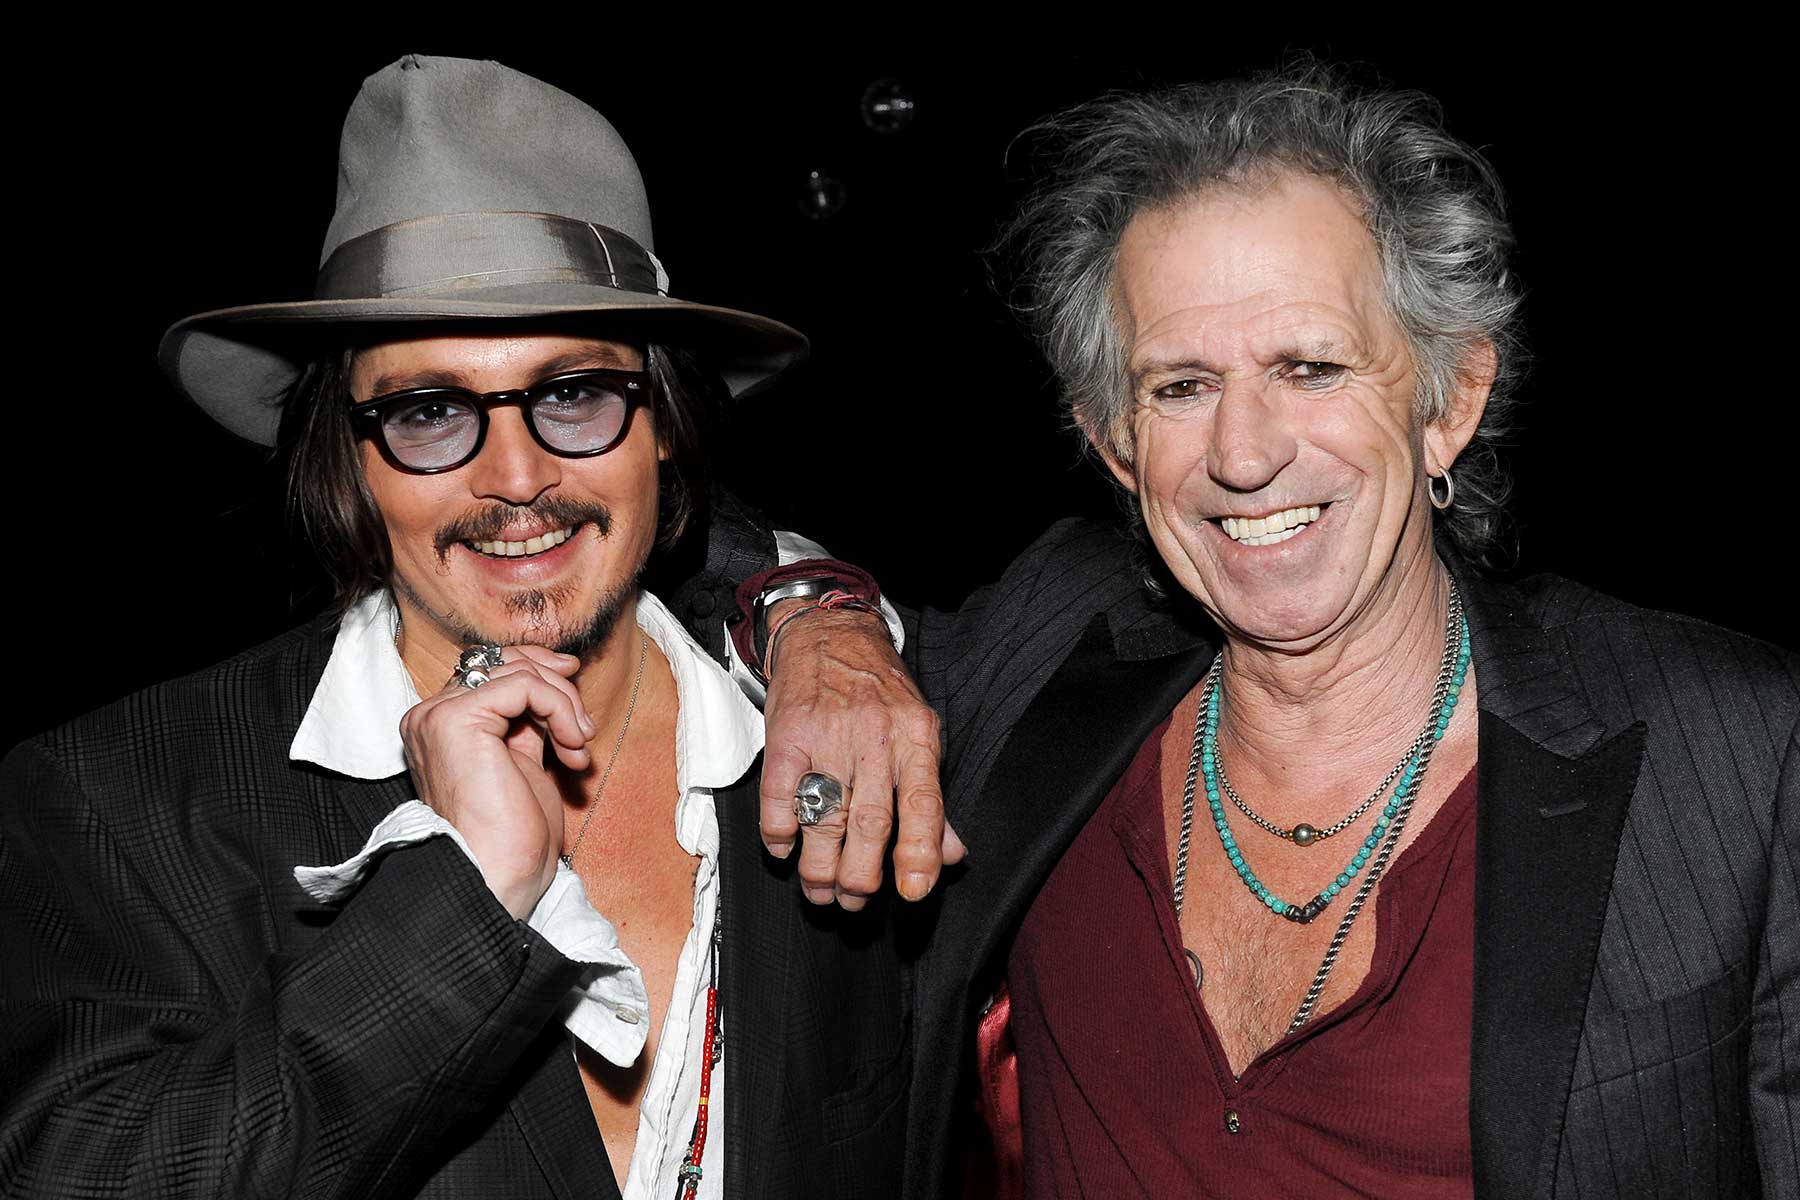 LOS ANGELES, CA - OCTOBER 17: Actor Johnny Depp, left, and musician Keith Richards pose together backstage during Spike TV's "SCREAM 2009" 4th annual event held at the Greek Theatre on Oct. 17, 2009 in Los Angeles, Calif. (Evan Agostini via AP)